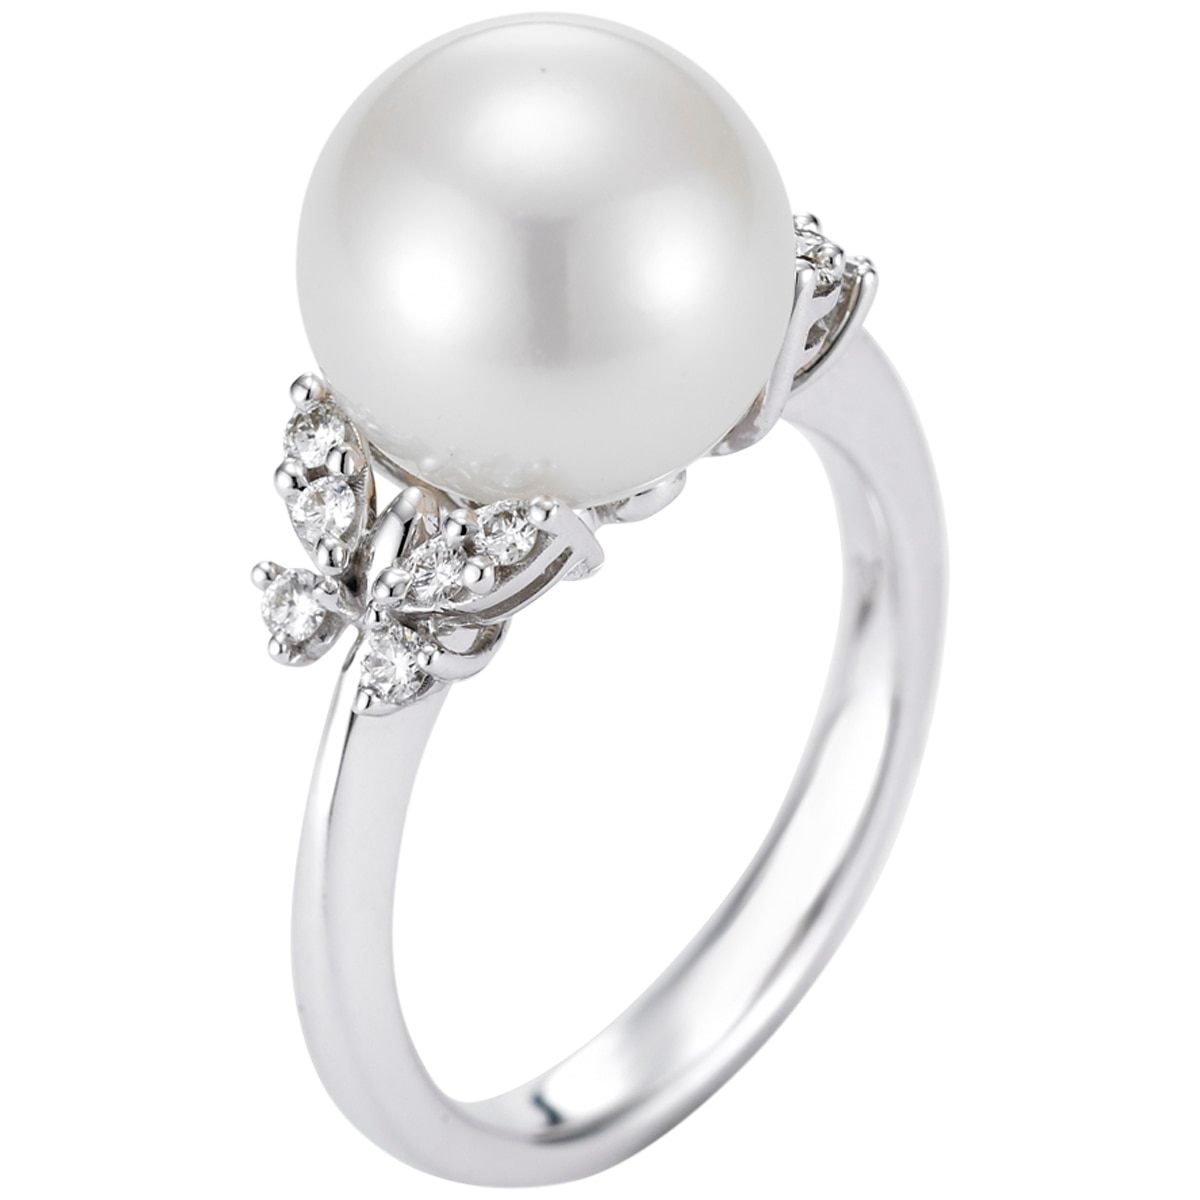 18KT White Gold Round Freshwater Cultured Pearl and Diamond Ring